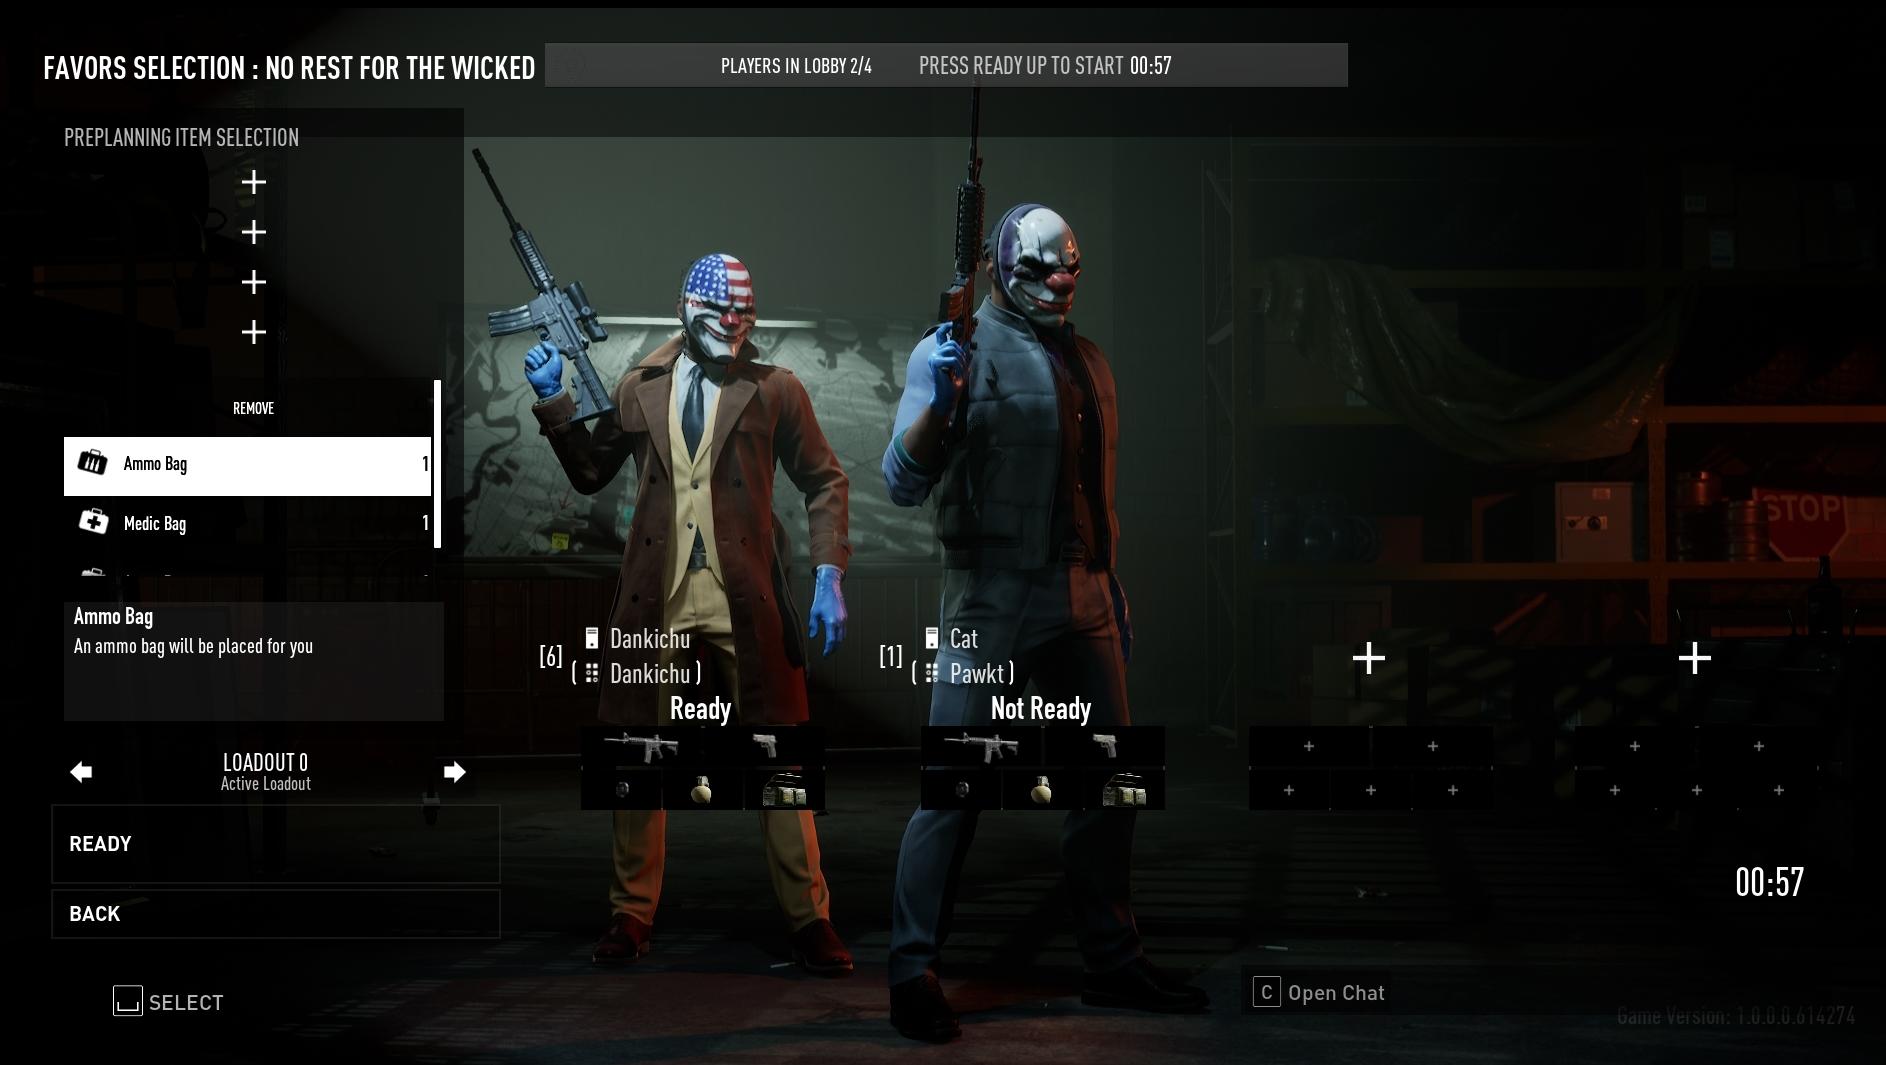 Payday 3 Beta Party Not Working, How to Fix Payday 3 Beta Party